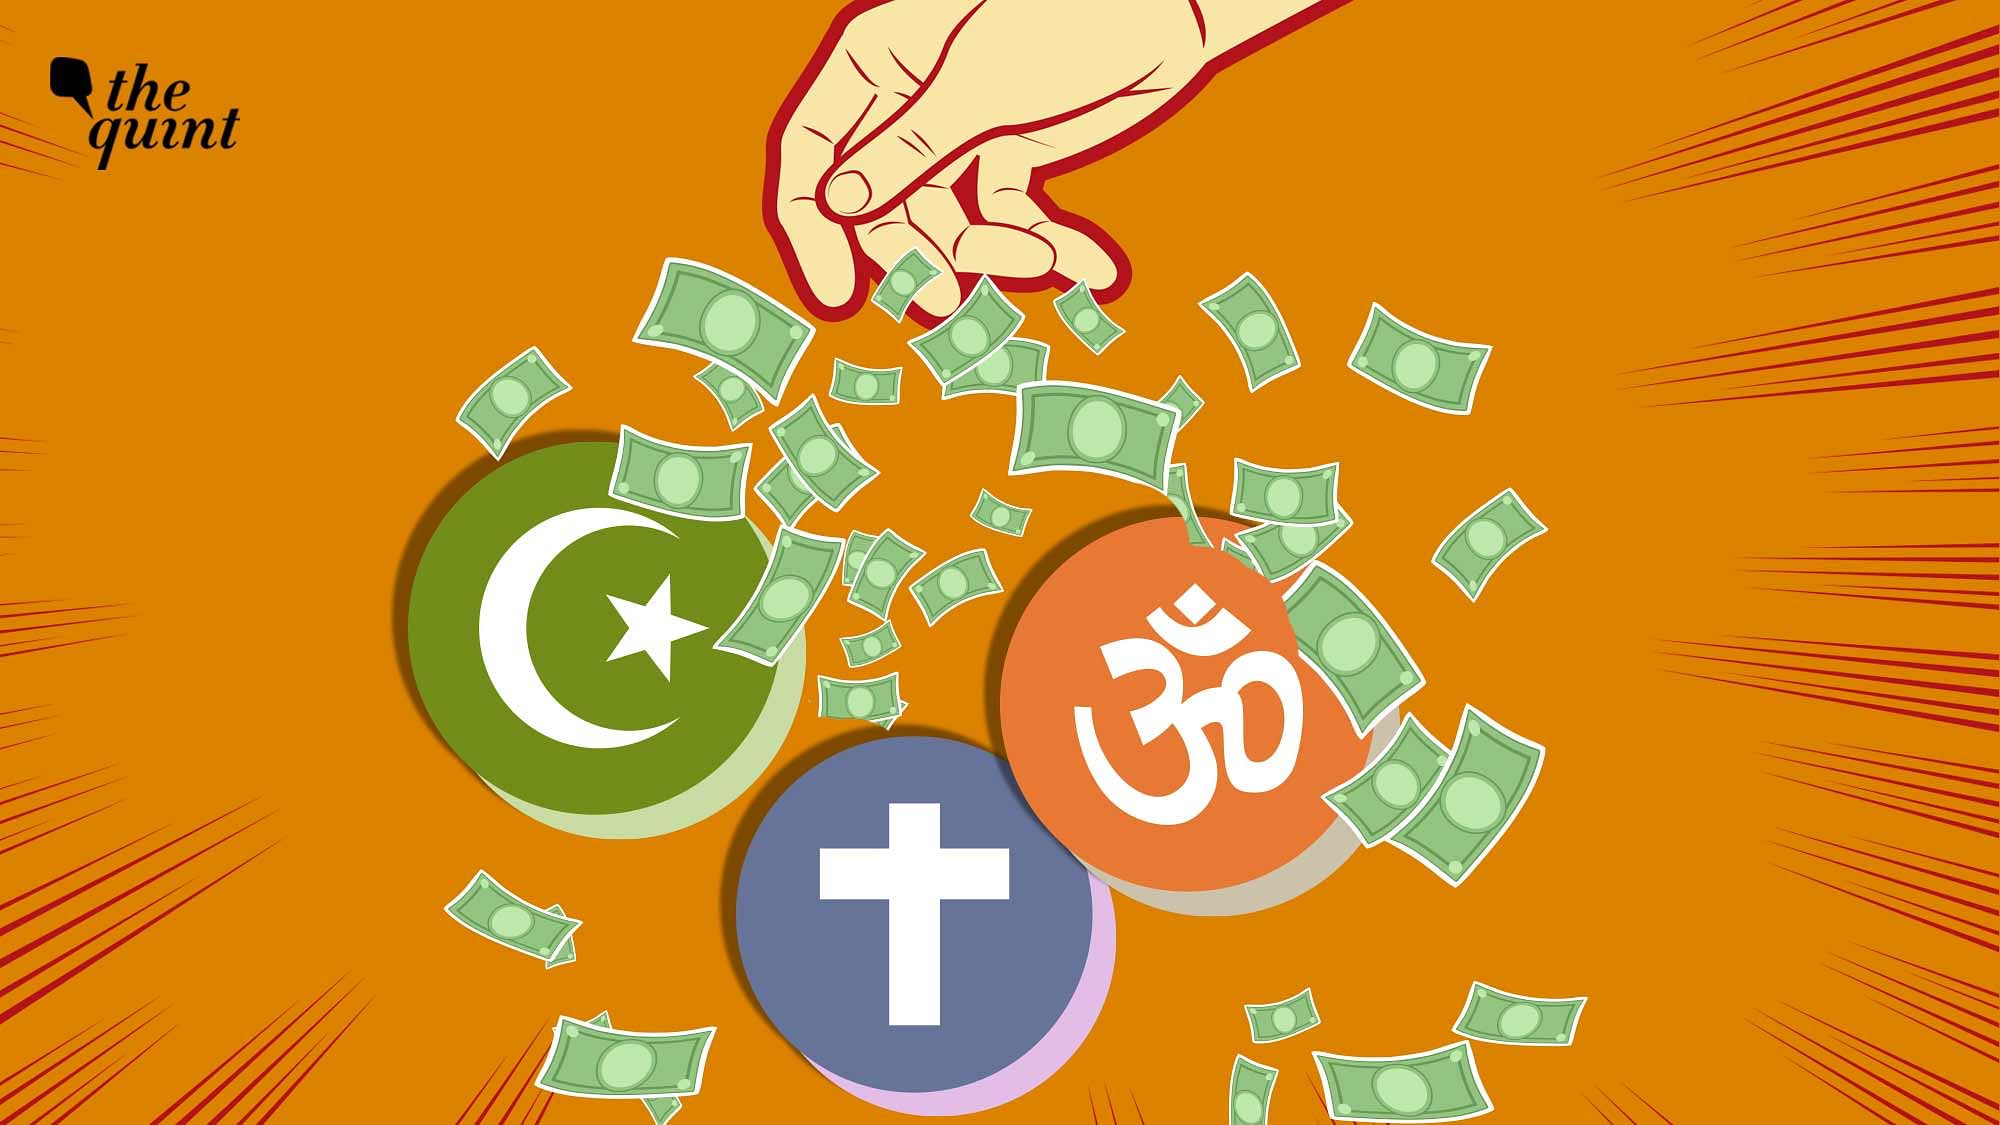 <div class="paragraphs"><p>What does ‘giving’ to ‘religious organisations’ mean to Indian households? What are the drivers behind giving to such organisations? Are the donations to ‘religious organisations’ intended exclusively for ‘religious purposes’ or do the motivations traverse religion?</p></div>